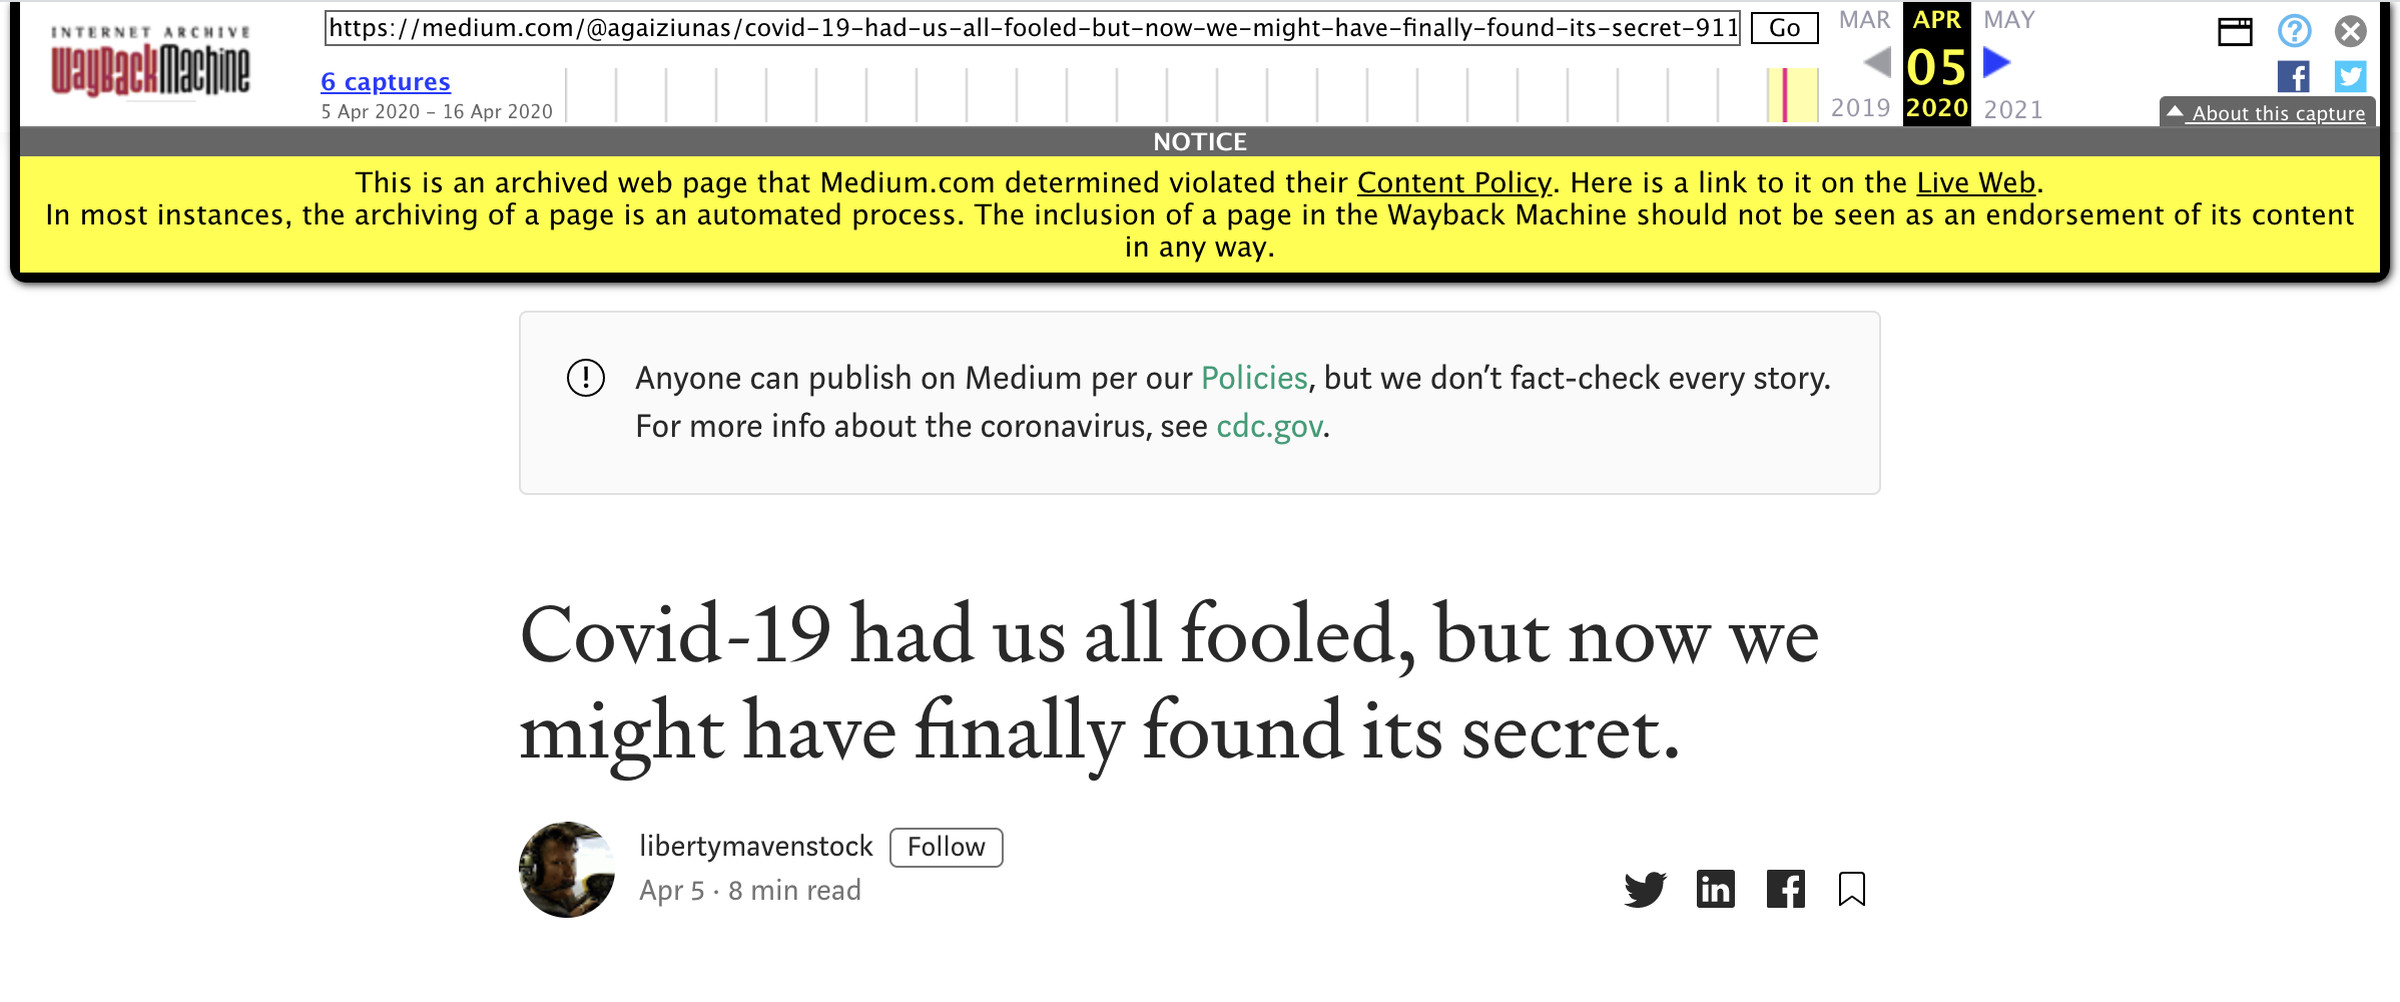 A post removed from Medium for making unsubstantiated claims about COVID-19, with a warning label.